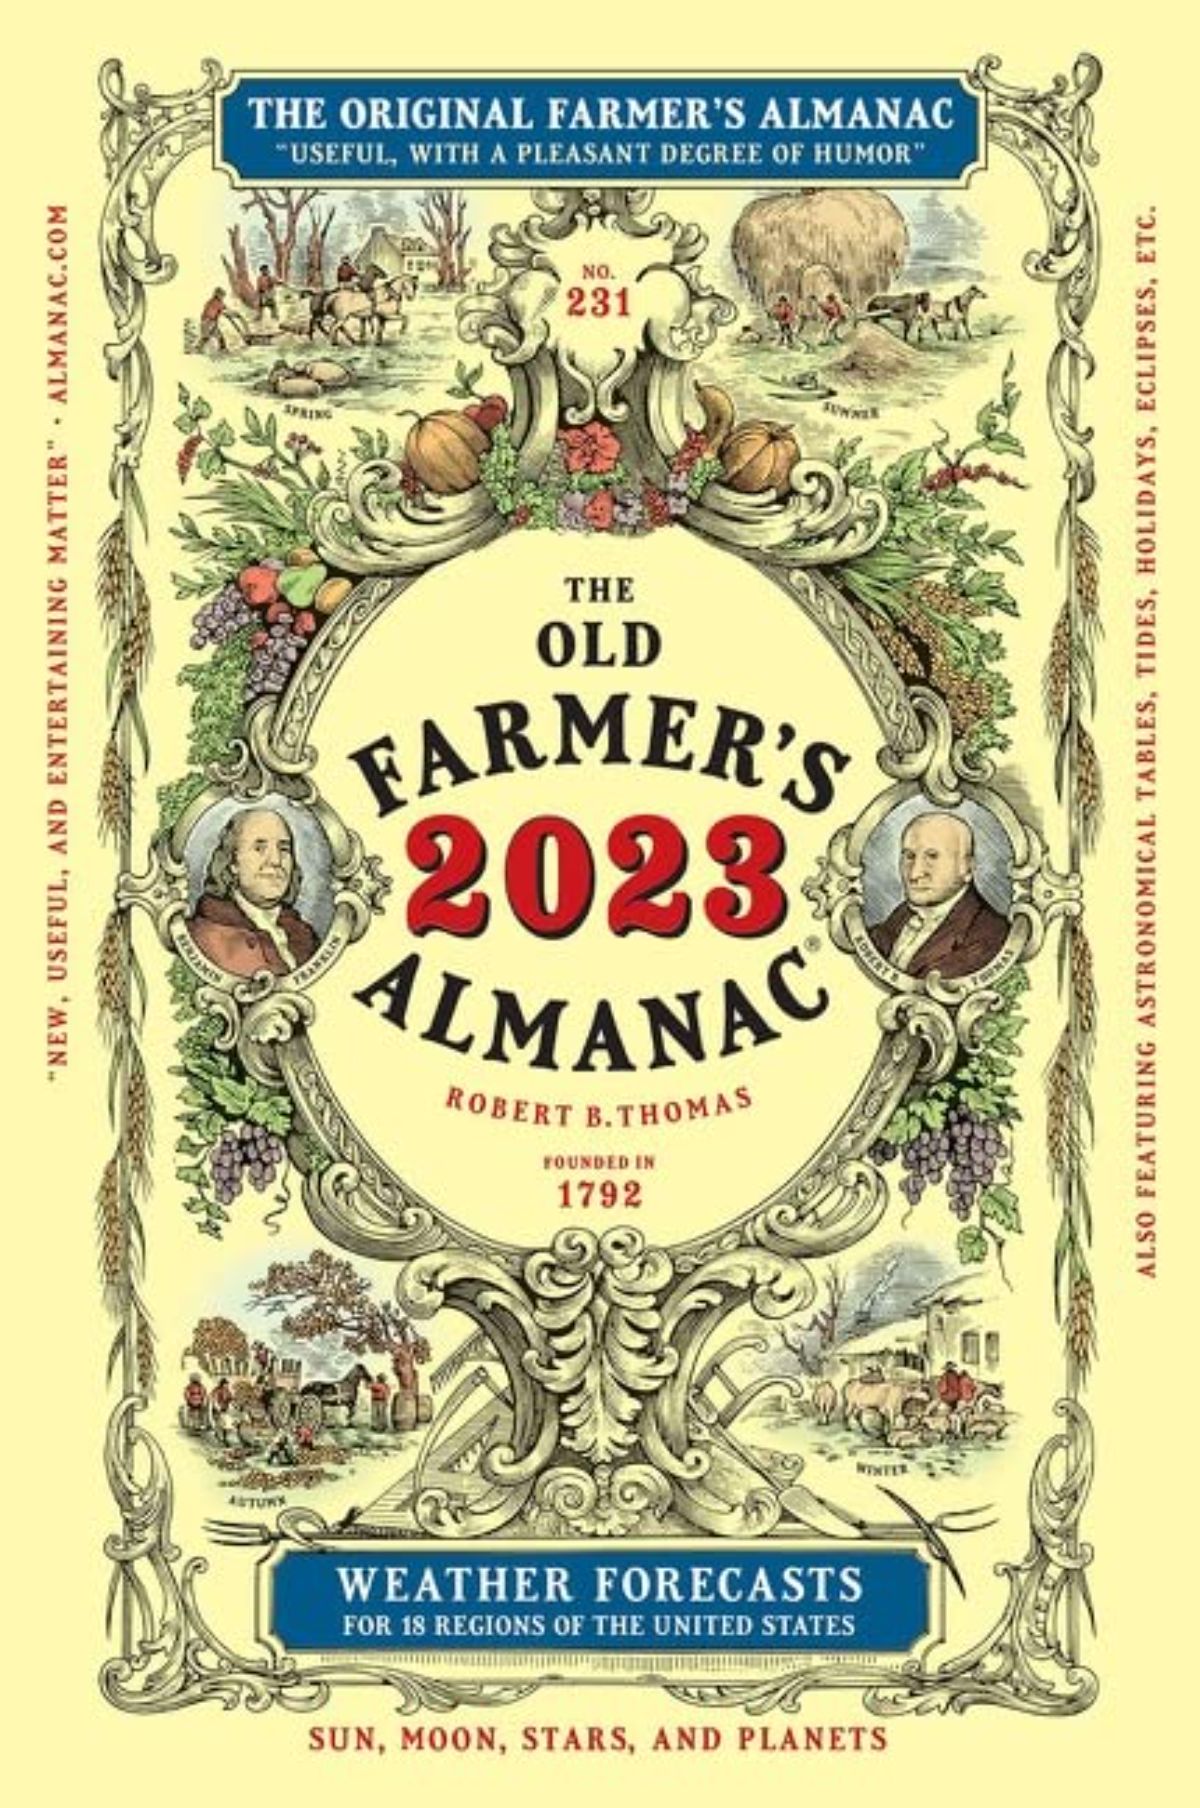 Book cover picture of the Old Farmer's Almanac 